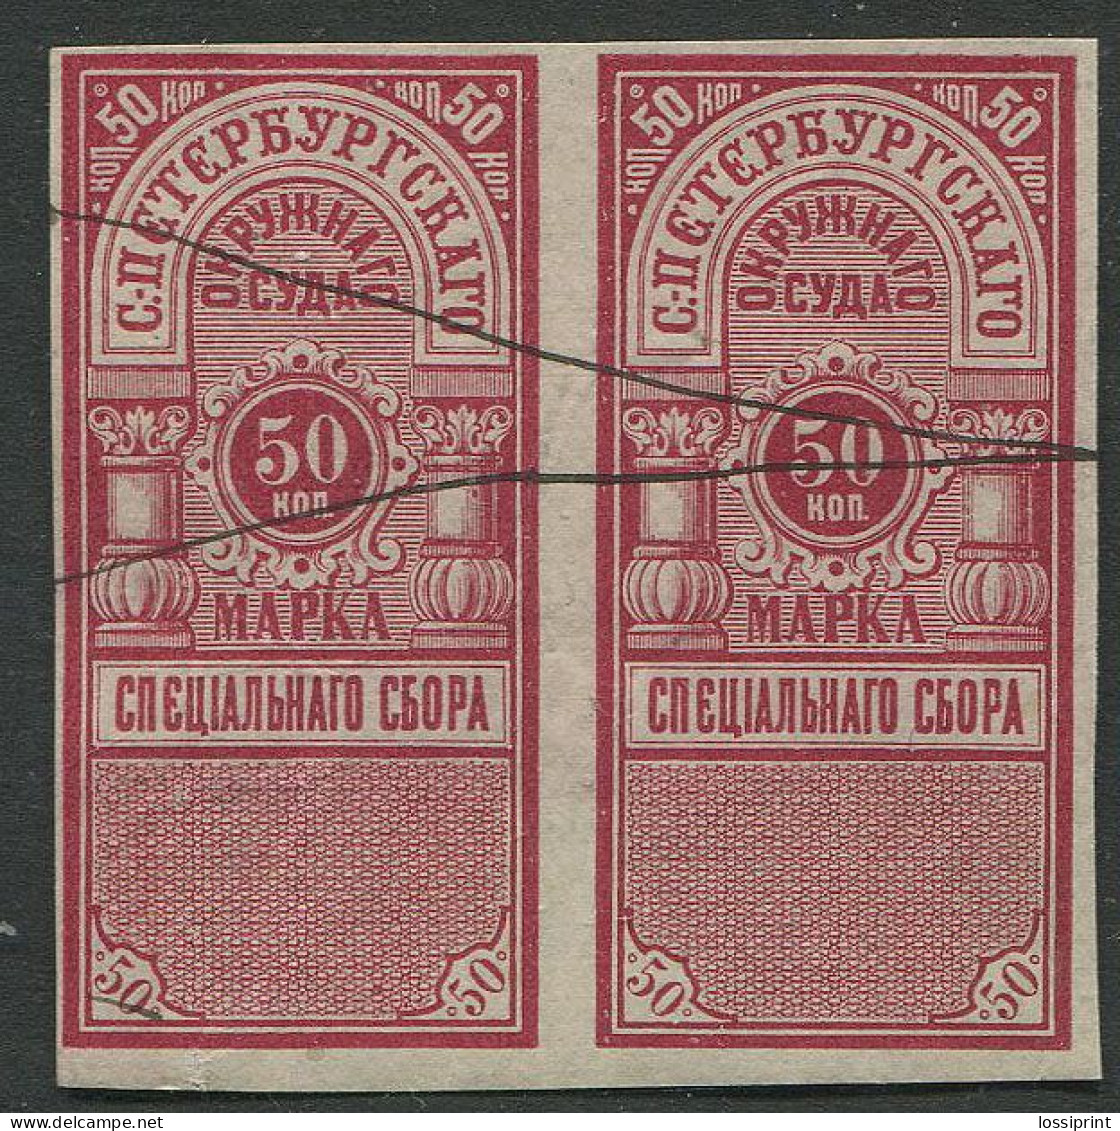 Russia:Used Revenue Stamps 50 Kopeika, Pair, Pre 1917 - Revenue Stamps